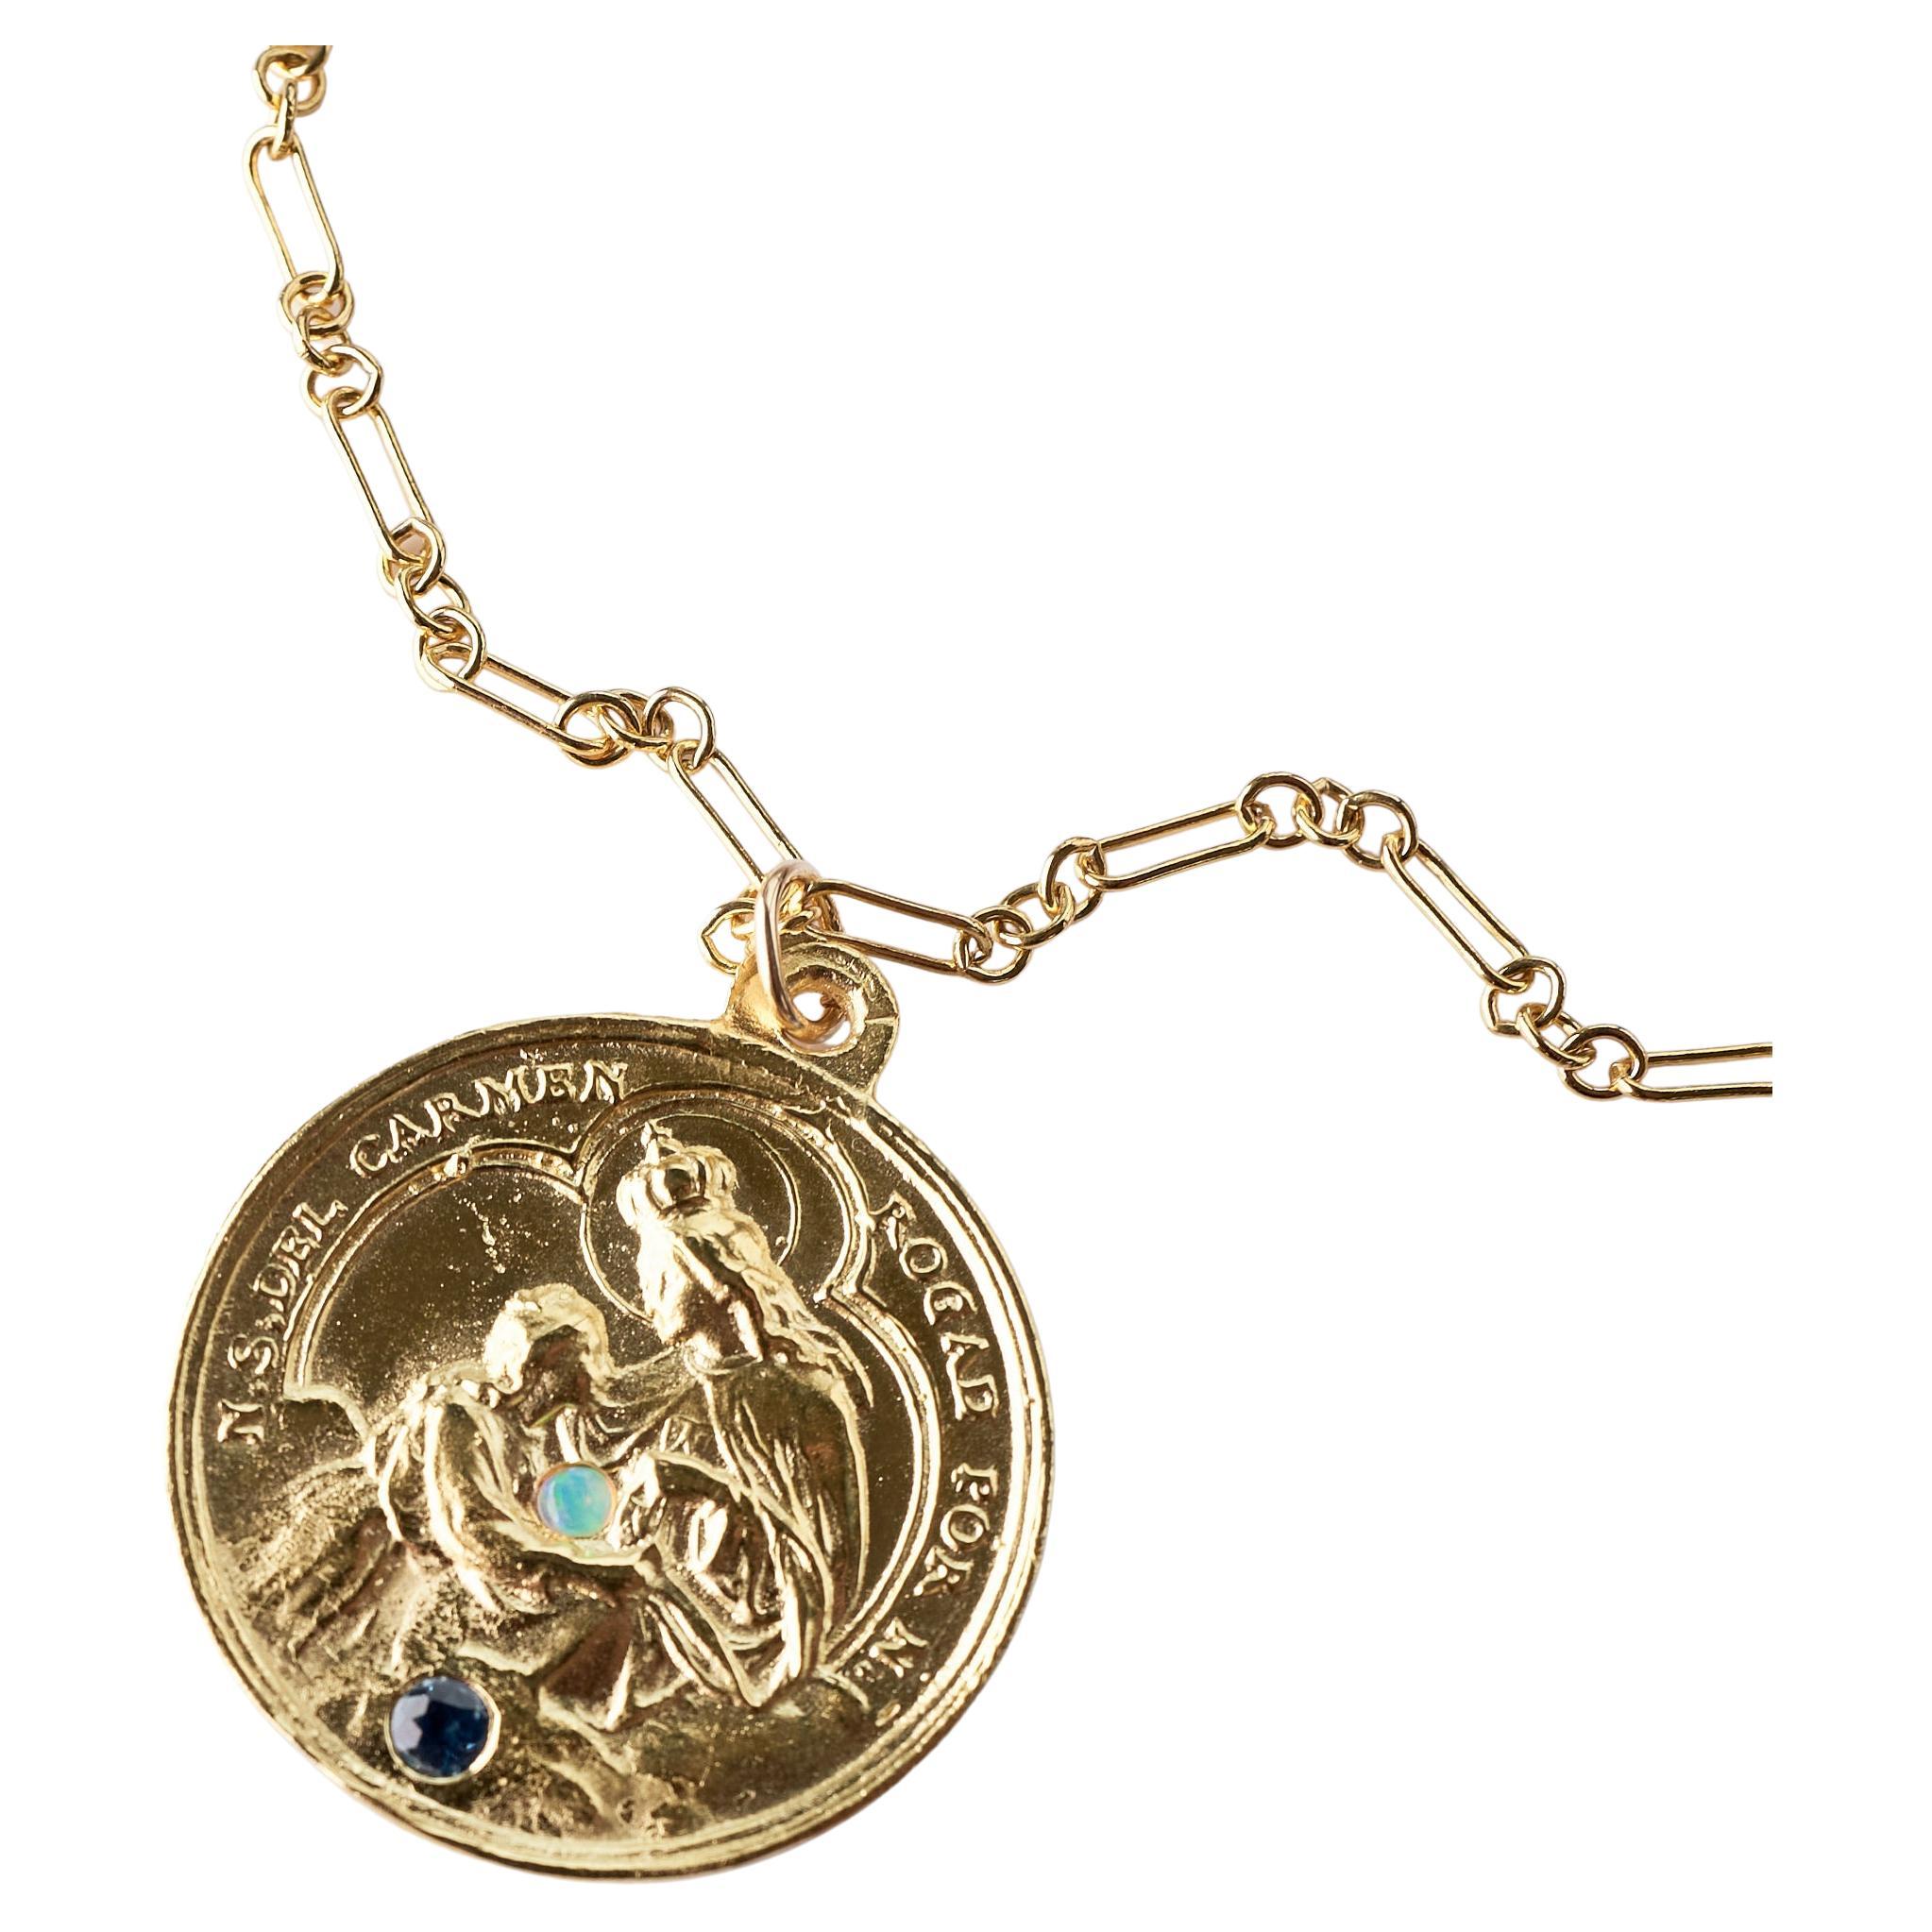 Sapphire Opal Medal Chain Necklace Religious Gold Tone J Dauphin
Gold Plated Medal and Gold Filled Chain

Symbols or medals can become a powerful tool in our arsenal for the spiritual. 
Since ancient times spiritual pendants, religious medals has